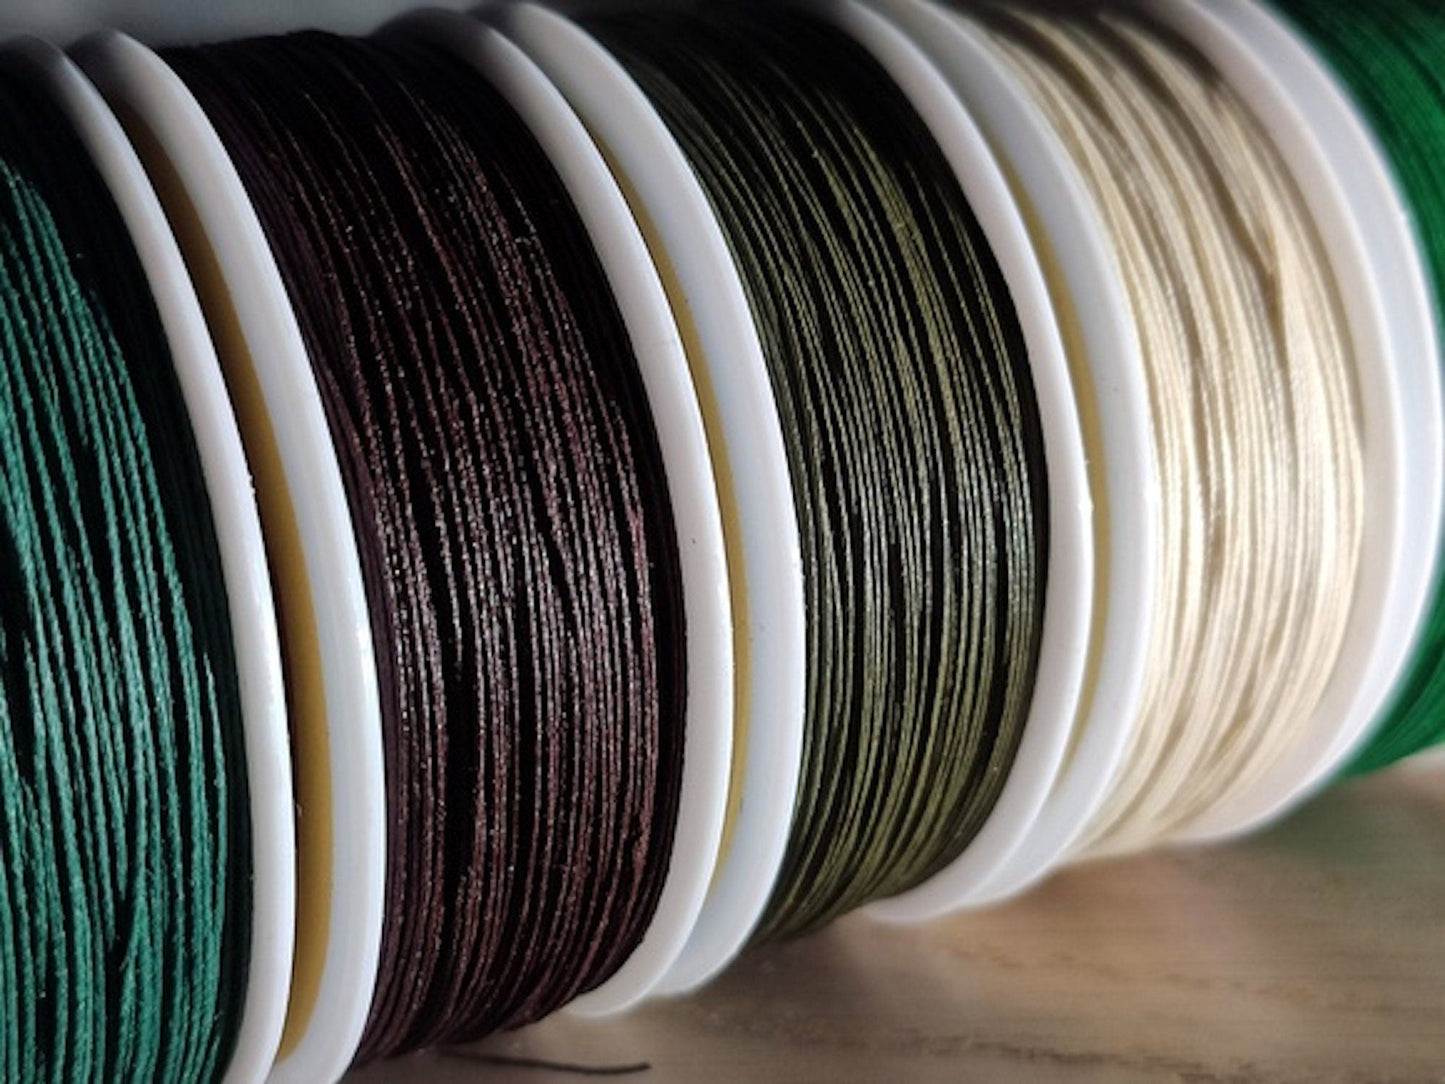 Famous ZJ#8 0.32-0.40mm Linen Waxed Threads For Handmade Letherwork, Thread For Leather, Sewing Thread ThreadsZJ